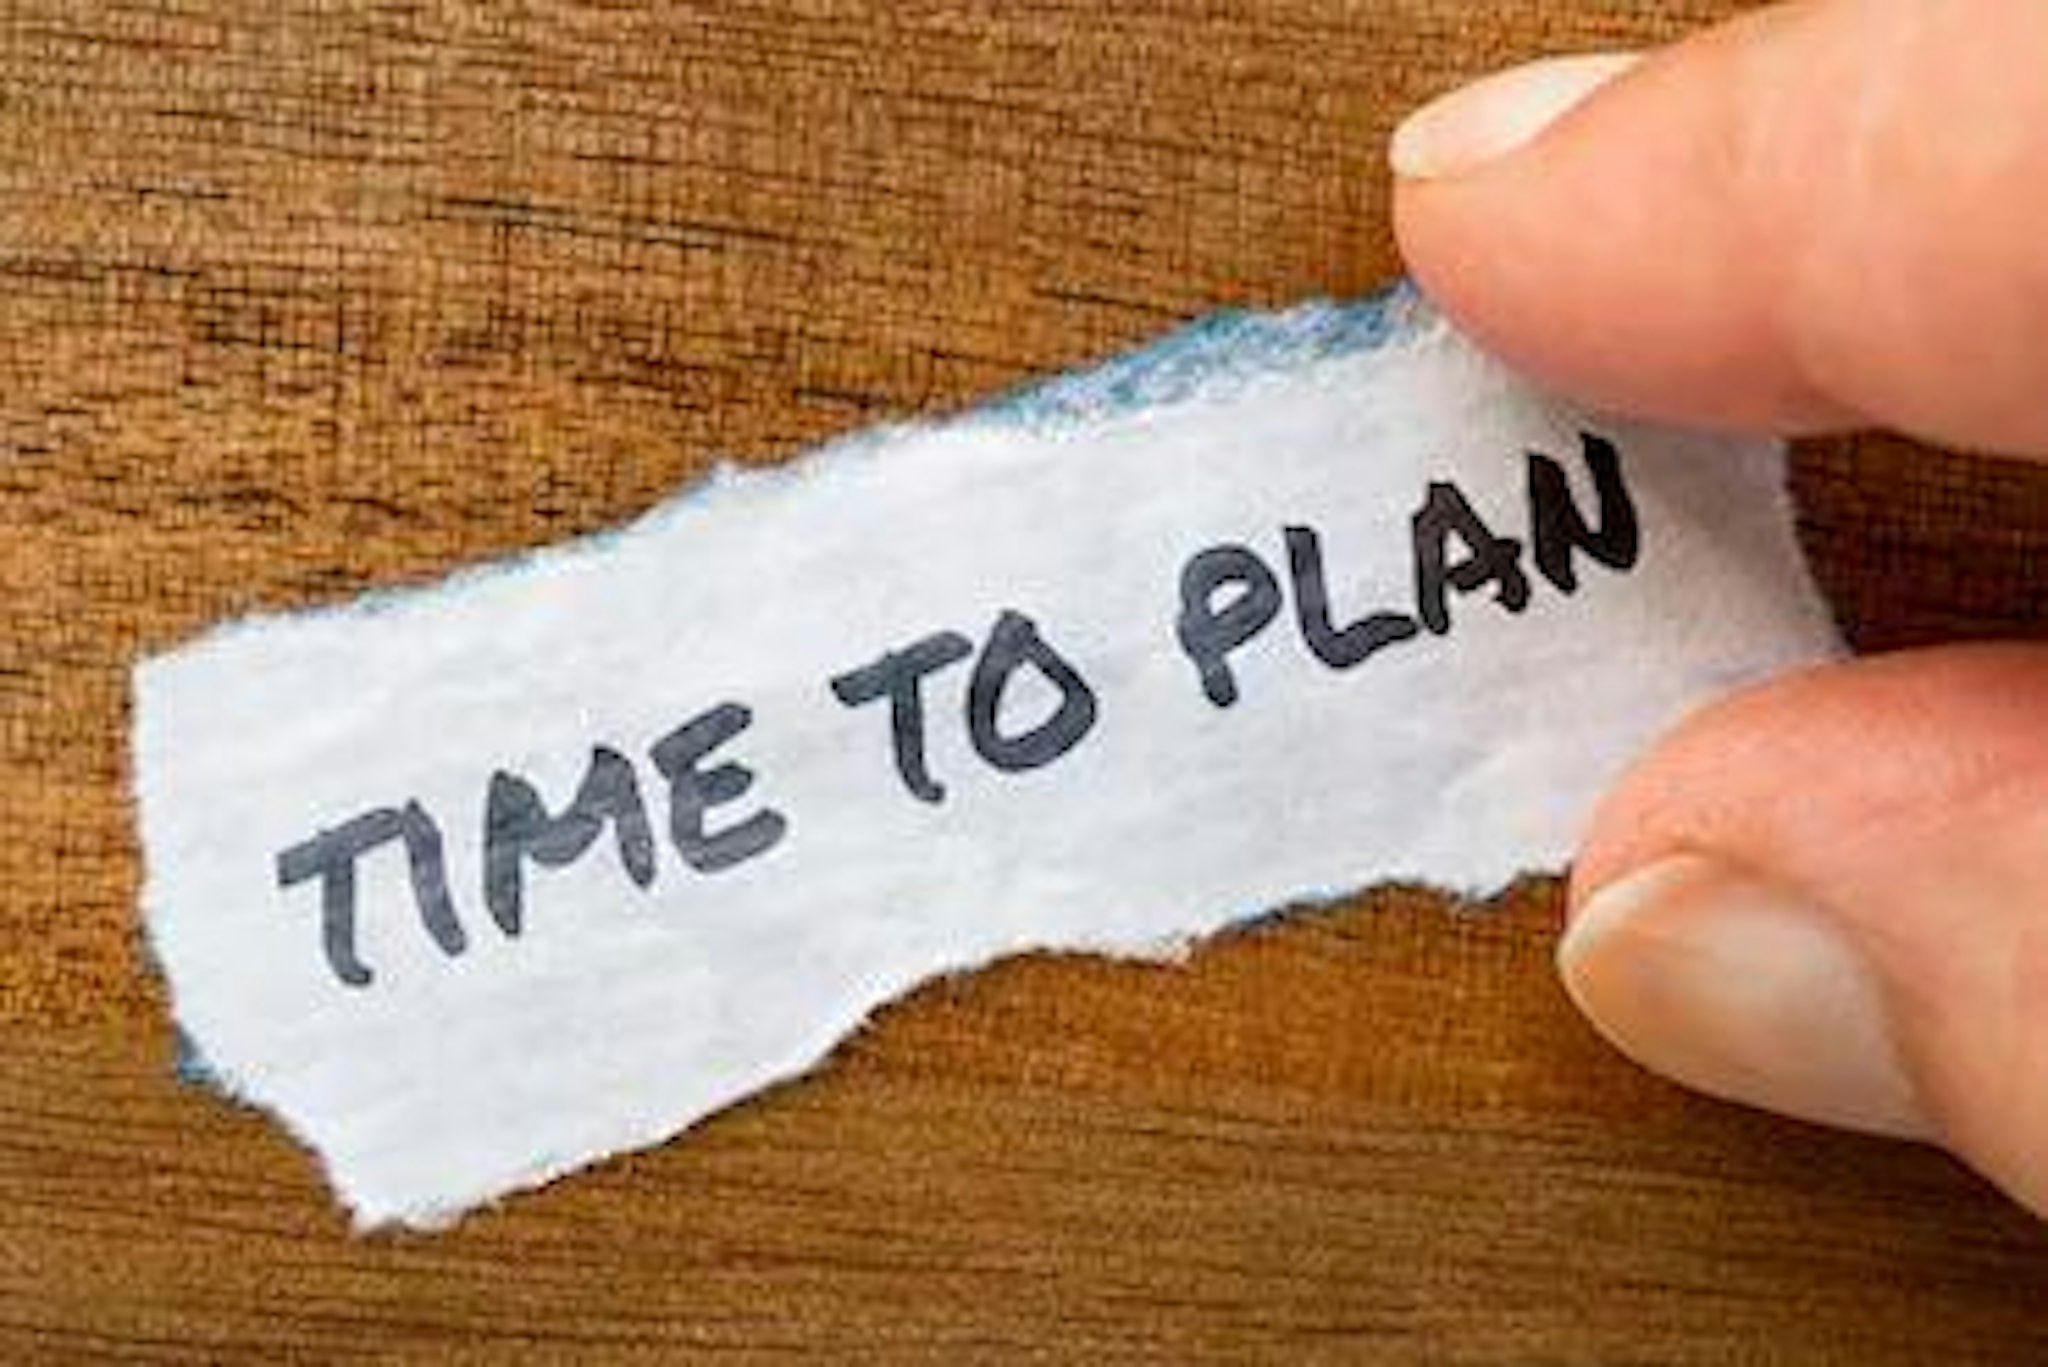 "Time to plan" written on a piece of paper, signifying the CEO selection process.